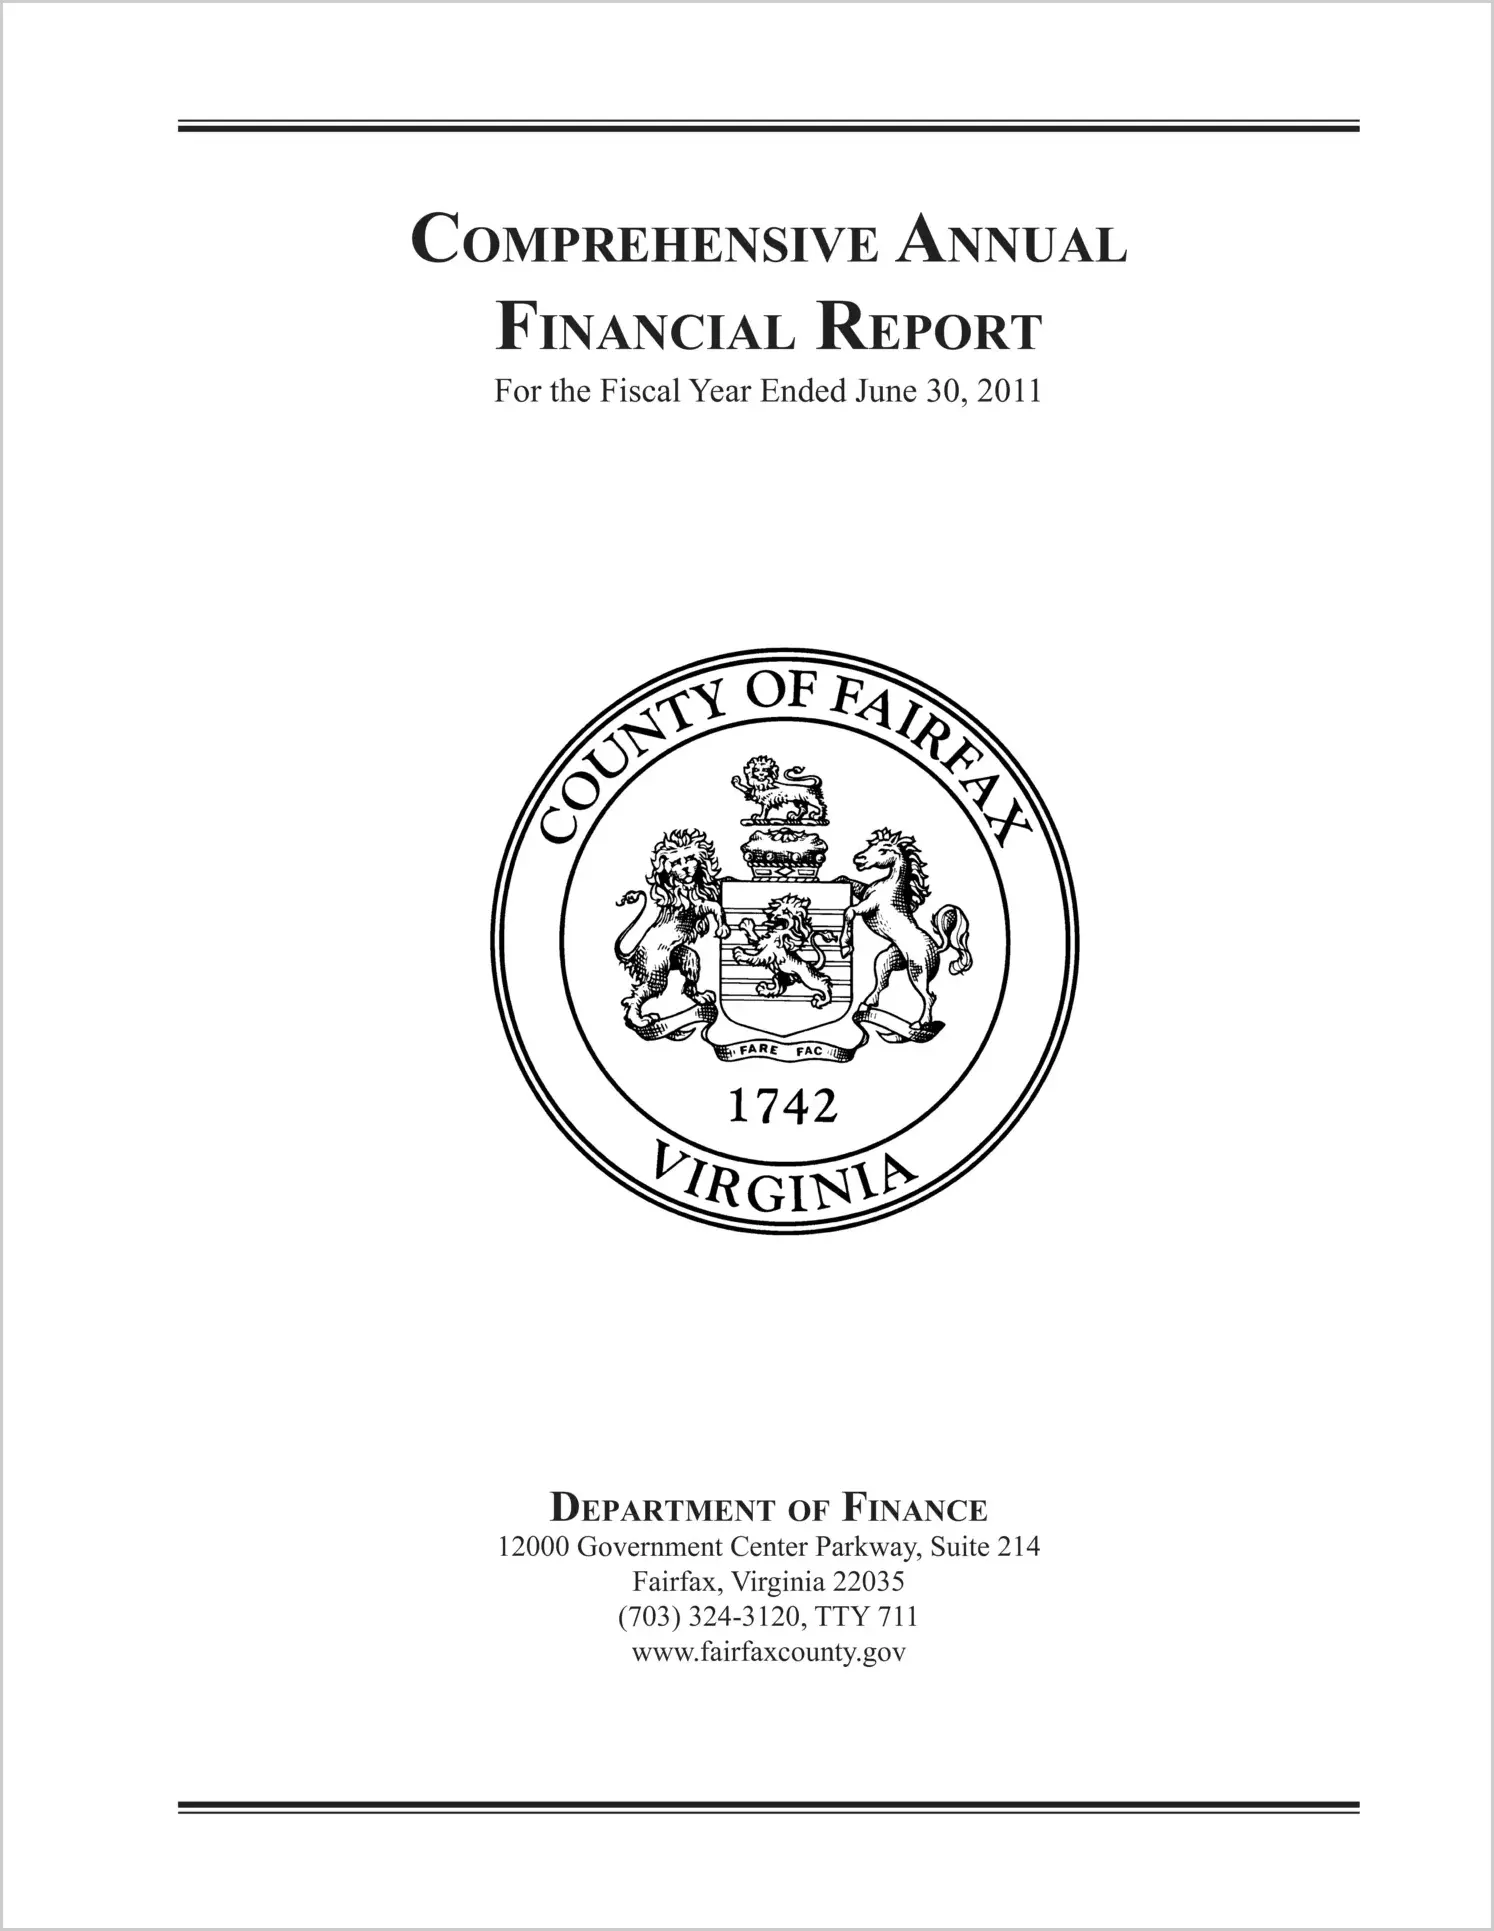 2011 Annual Financial Report for County of Fairfax